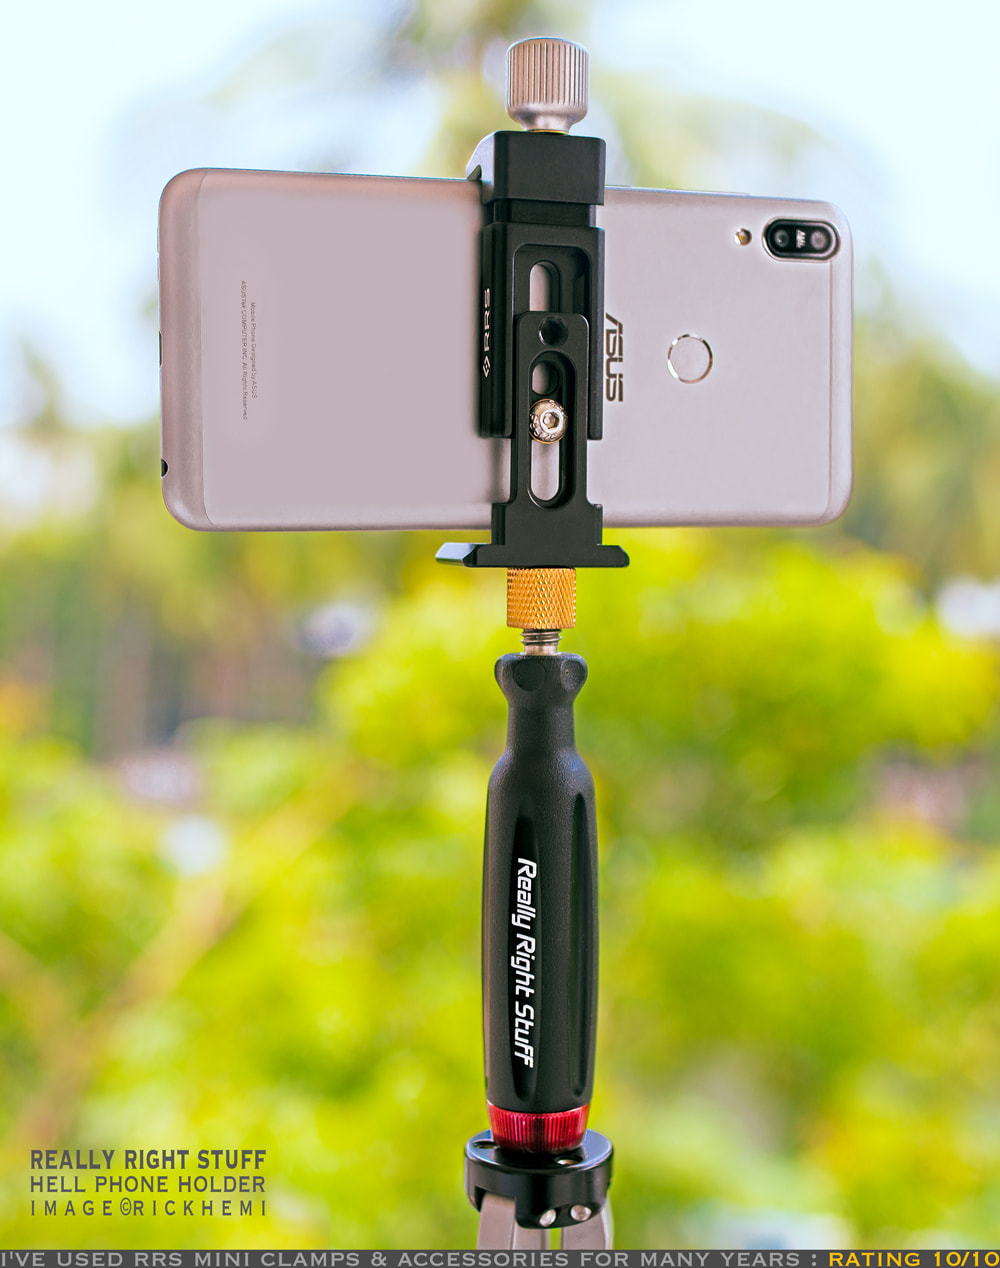 solo overland travel and transit offshore, RRS (really right stuff) cell phone clamp holder, image by Rick Hemi 